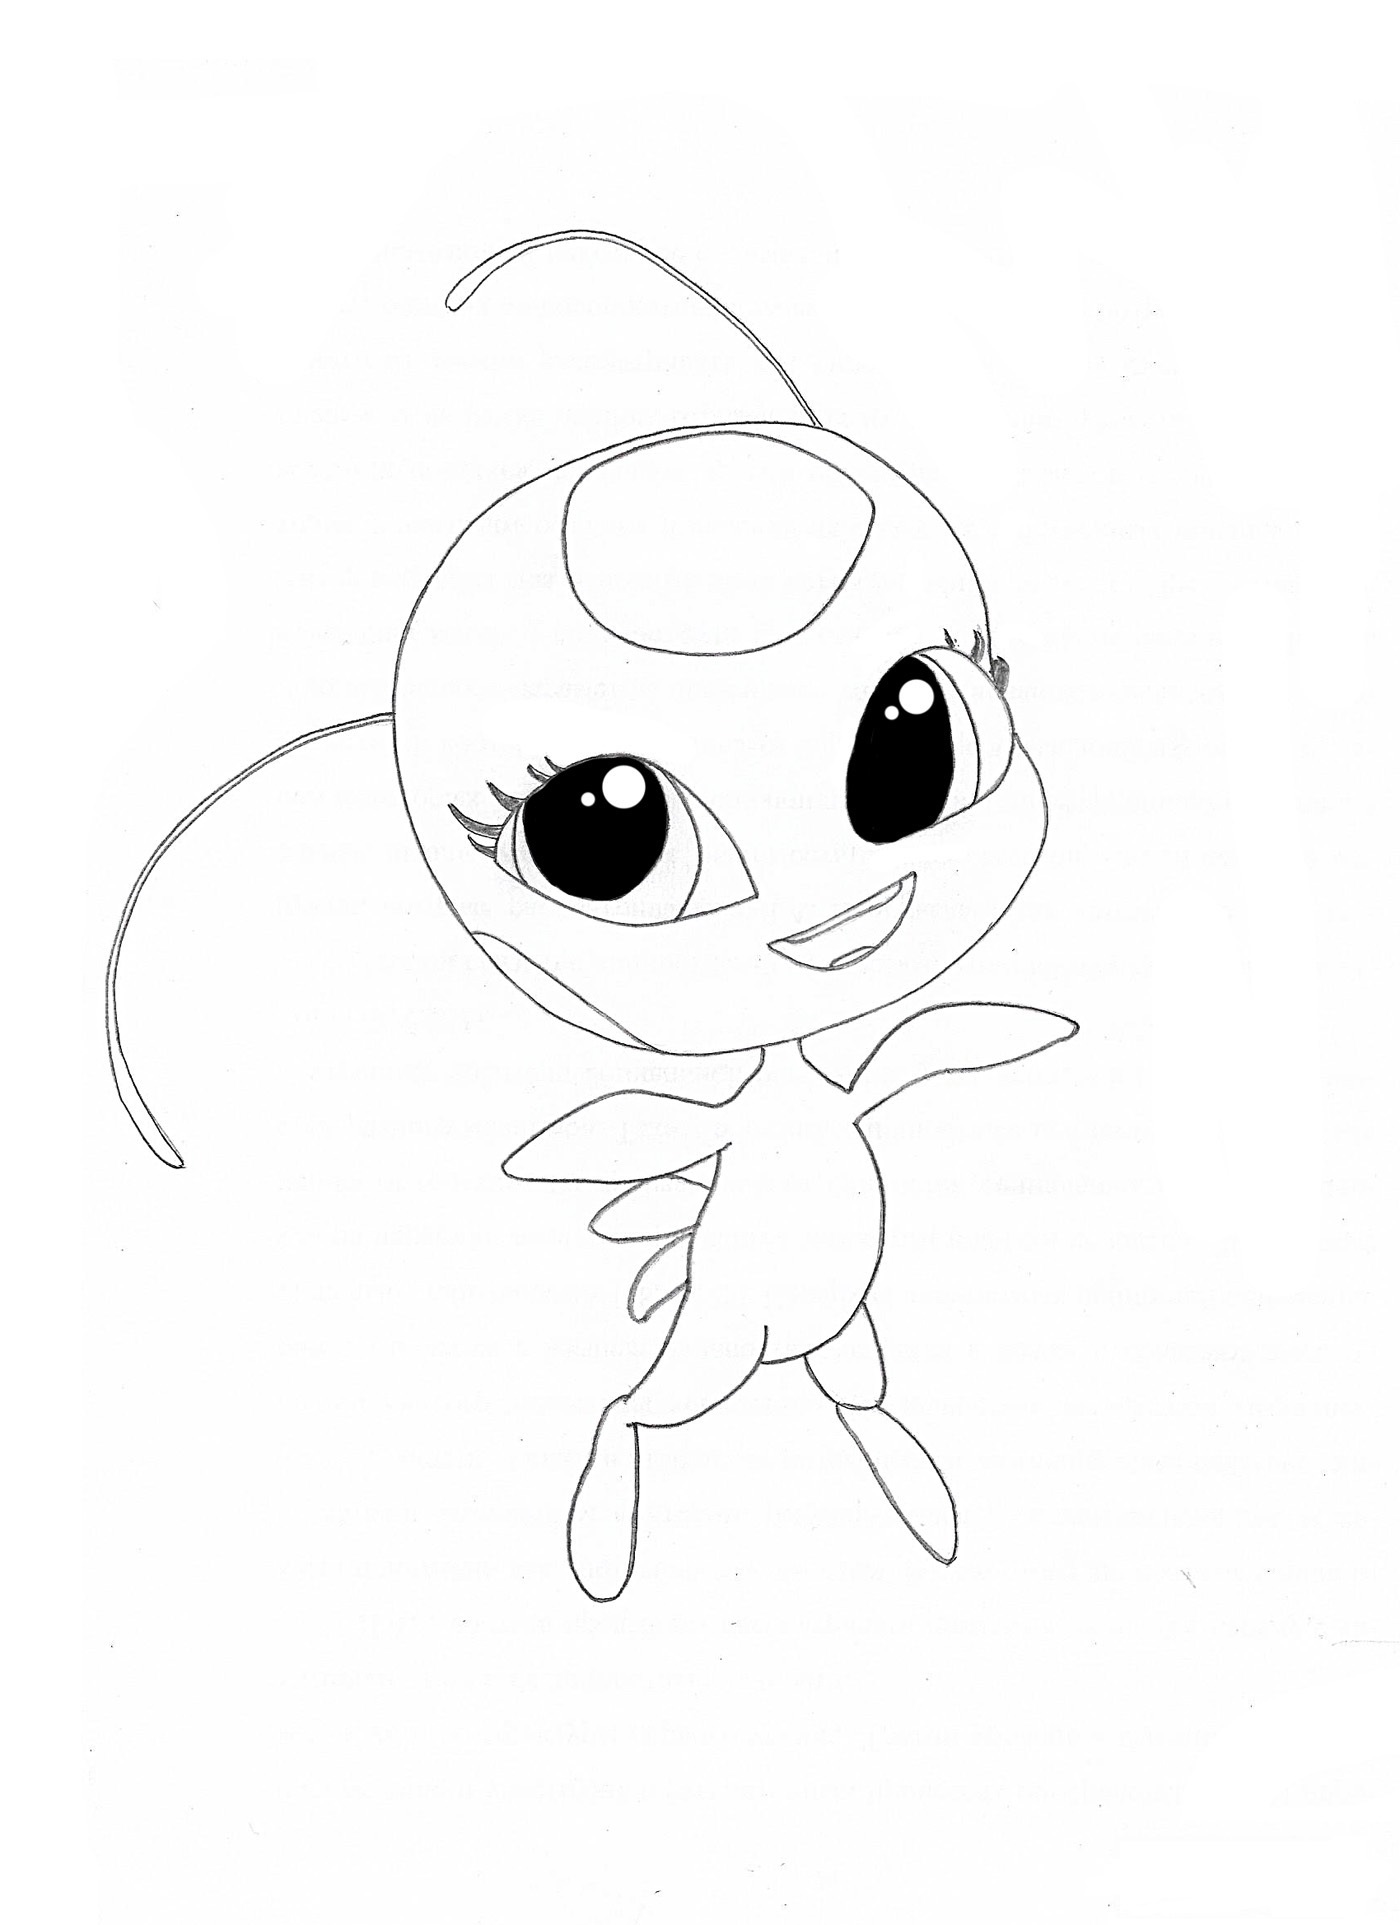 Noir Cat and Ladybug Coloring Pages Kwami Tikki - Get Coloring Pages